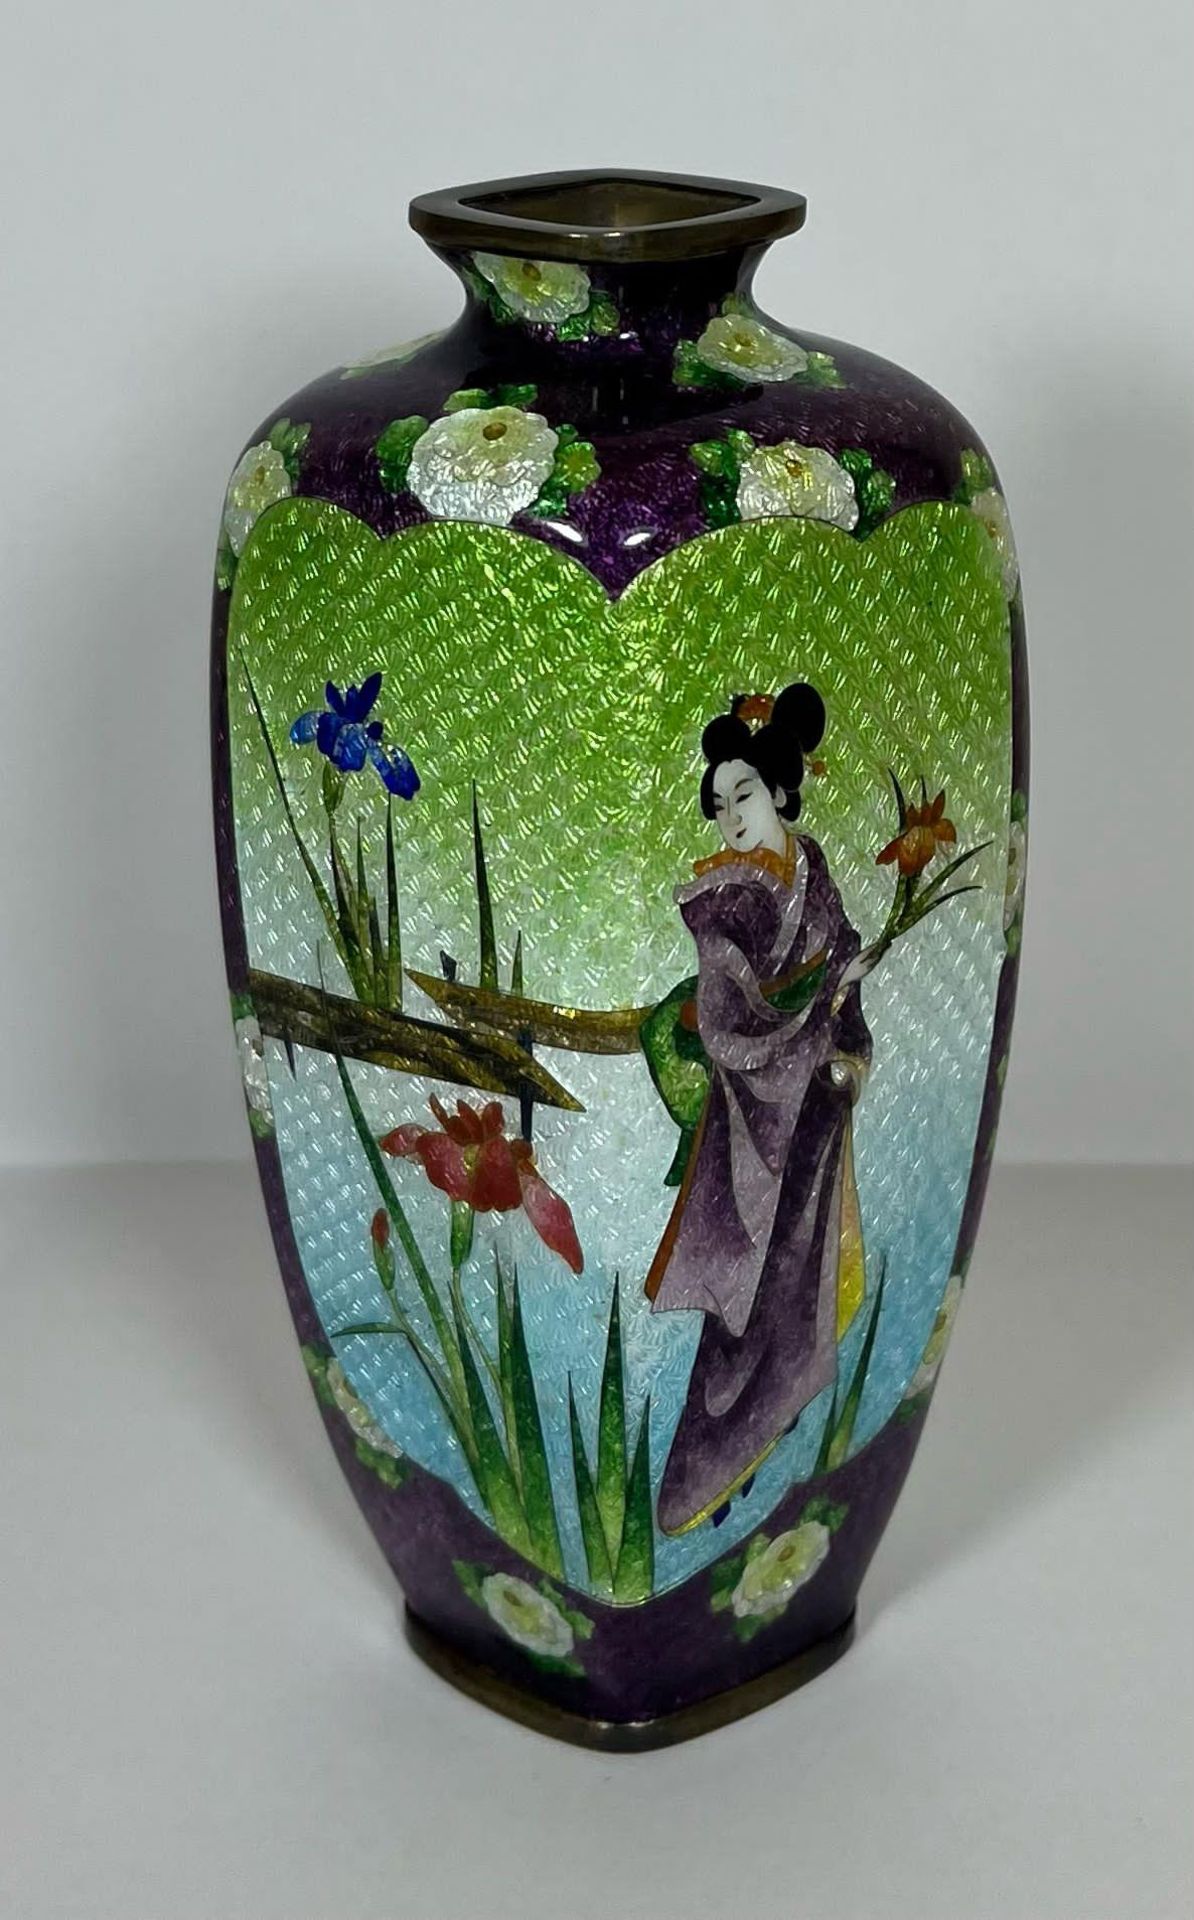 A JAPANESE GINBARI MEIJI PERIOD (1868-1912) ENAMEL DESIGN VASE DECORATED WITH A GEISHA GIRL BY A